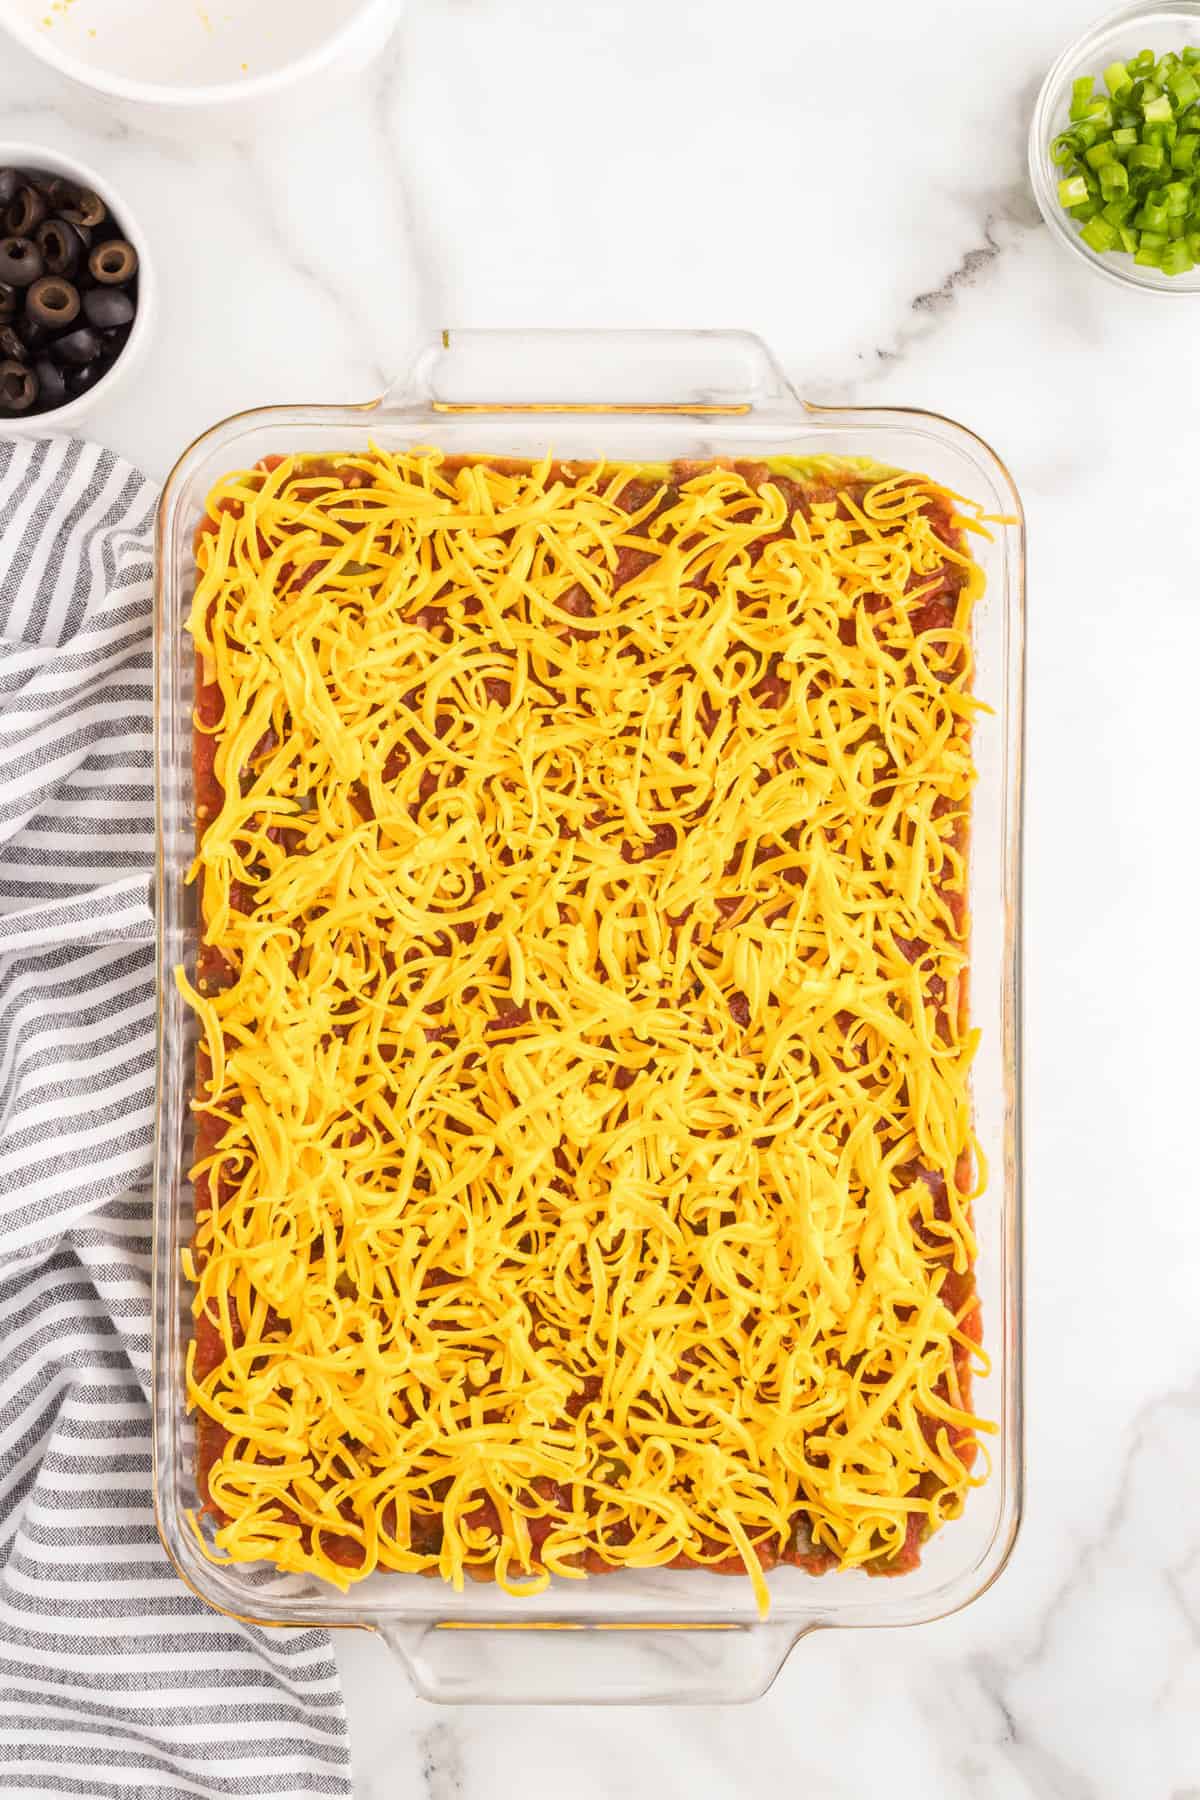 Adding shredded cheddar cheese to 7 layer dip recipe in glass serving dish